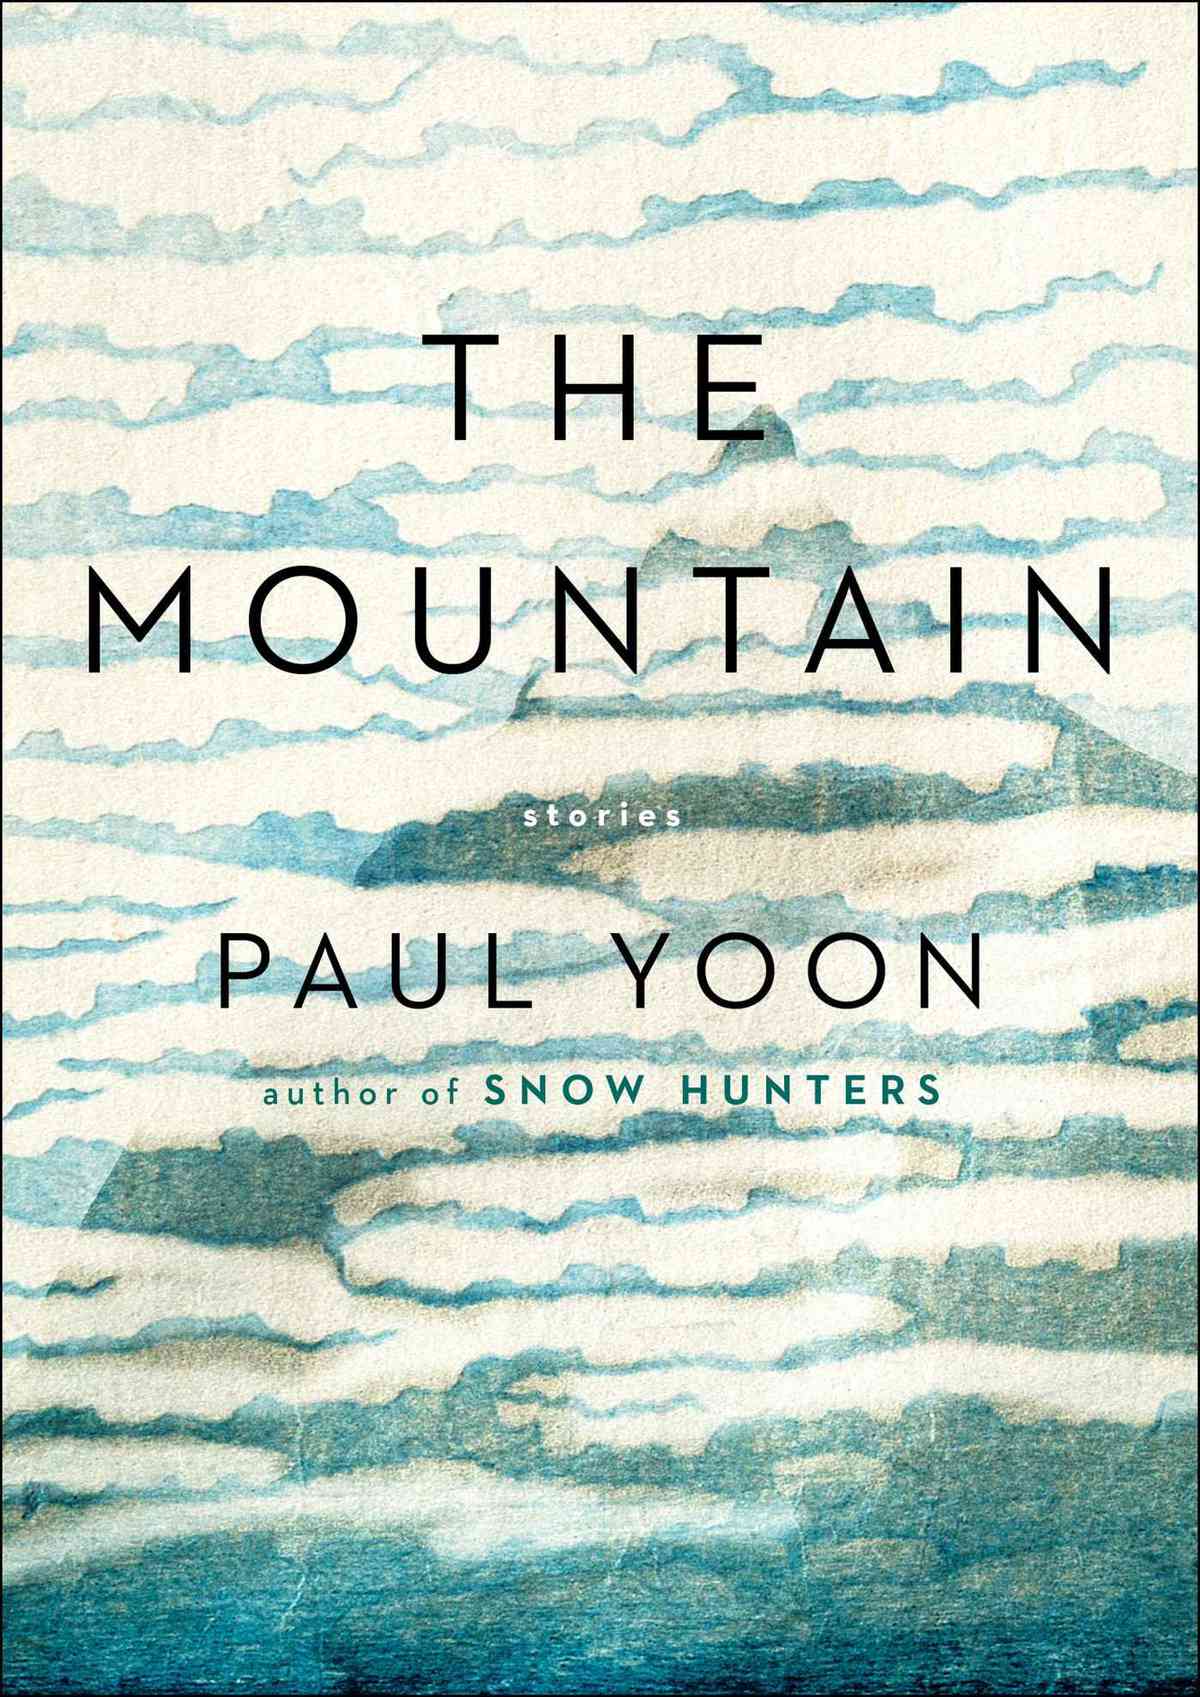 The Mountain: Stories by Paul Yoon